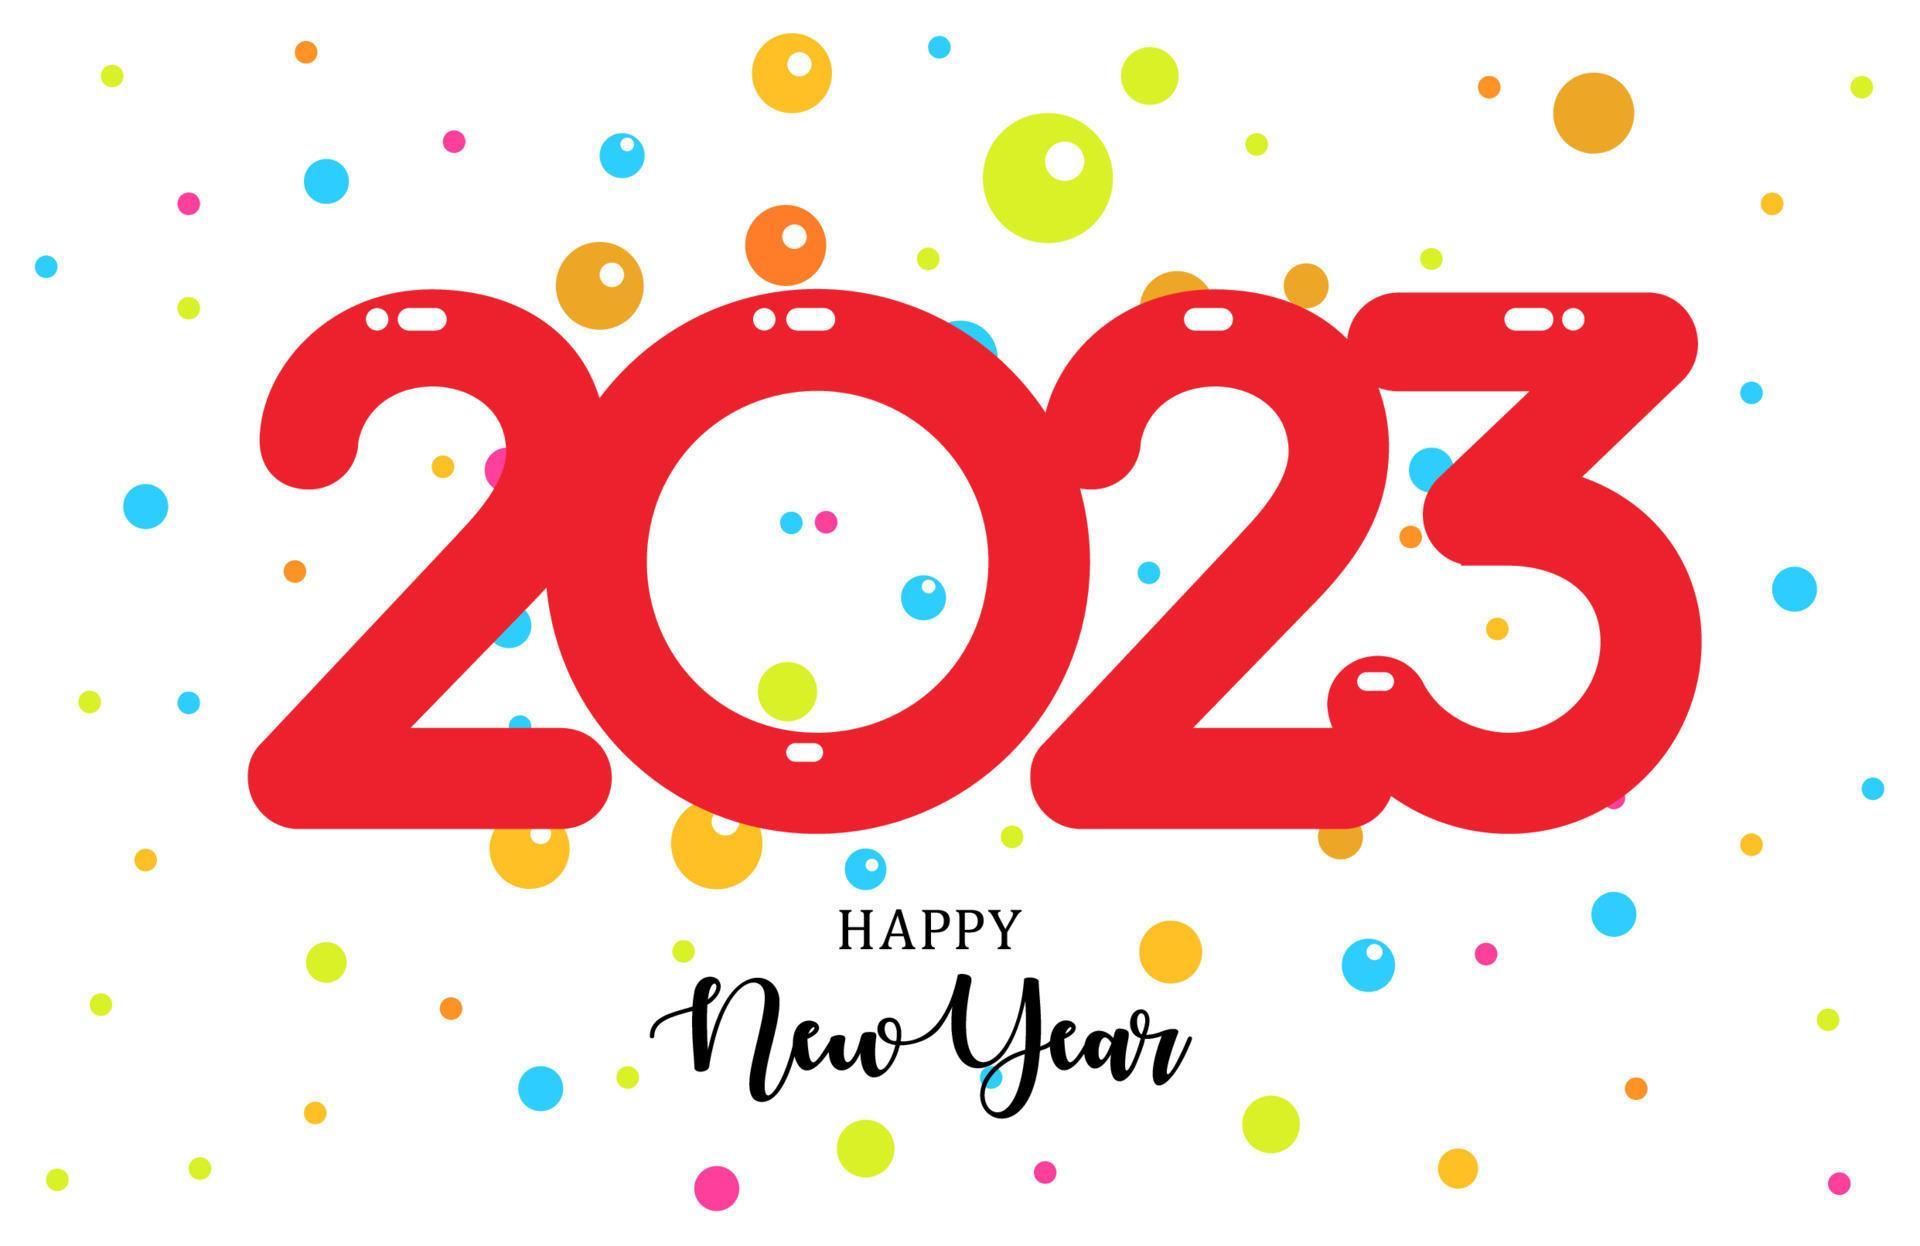 Special Happy New Year 2023 Images Free Download To Wish